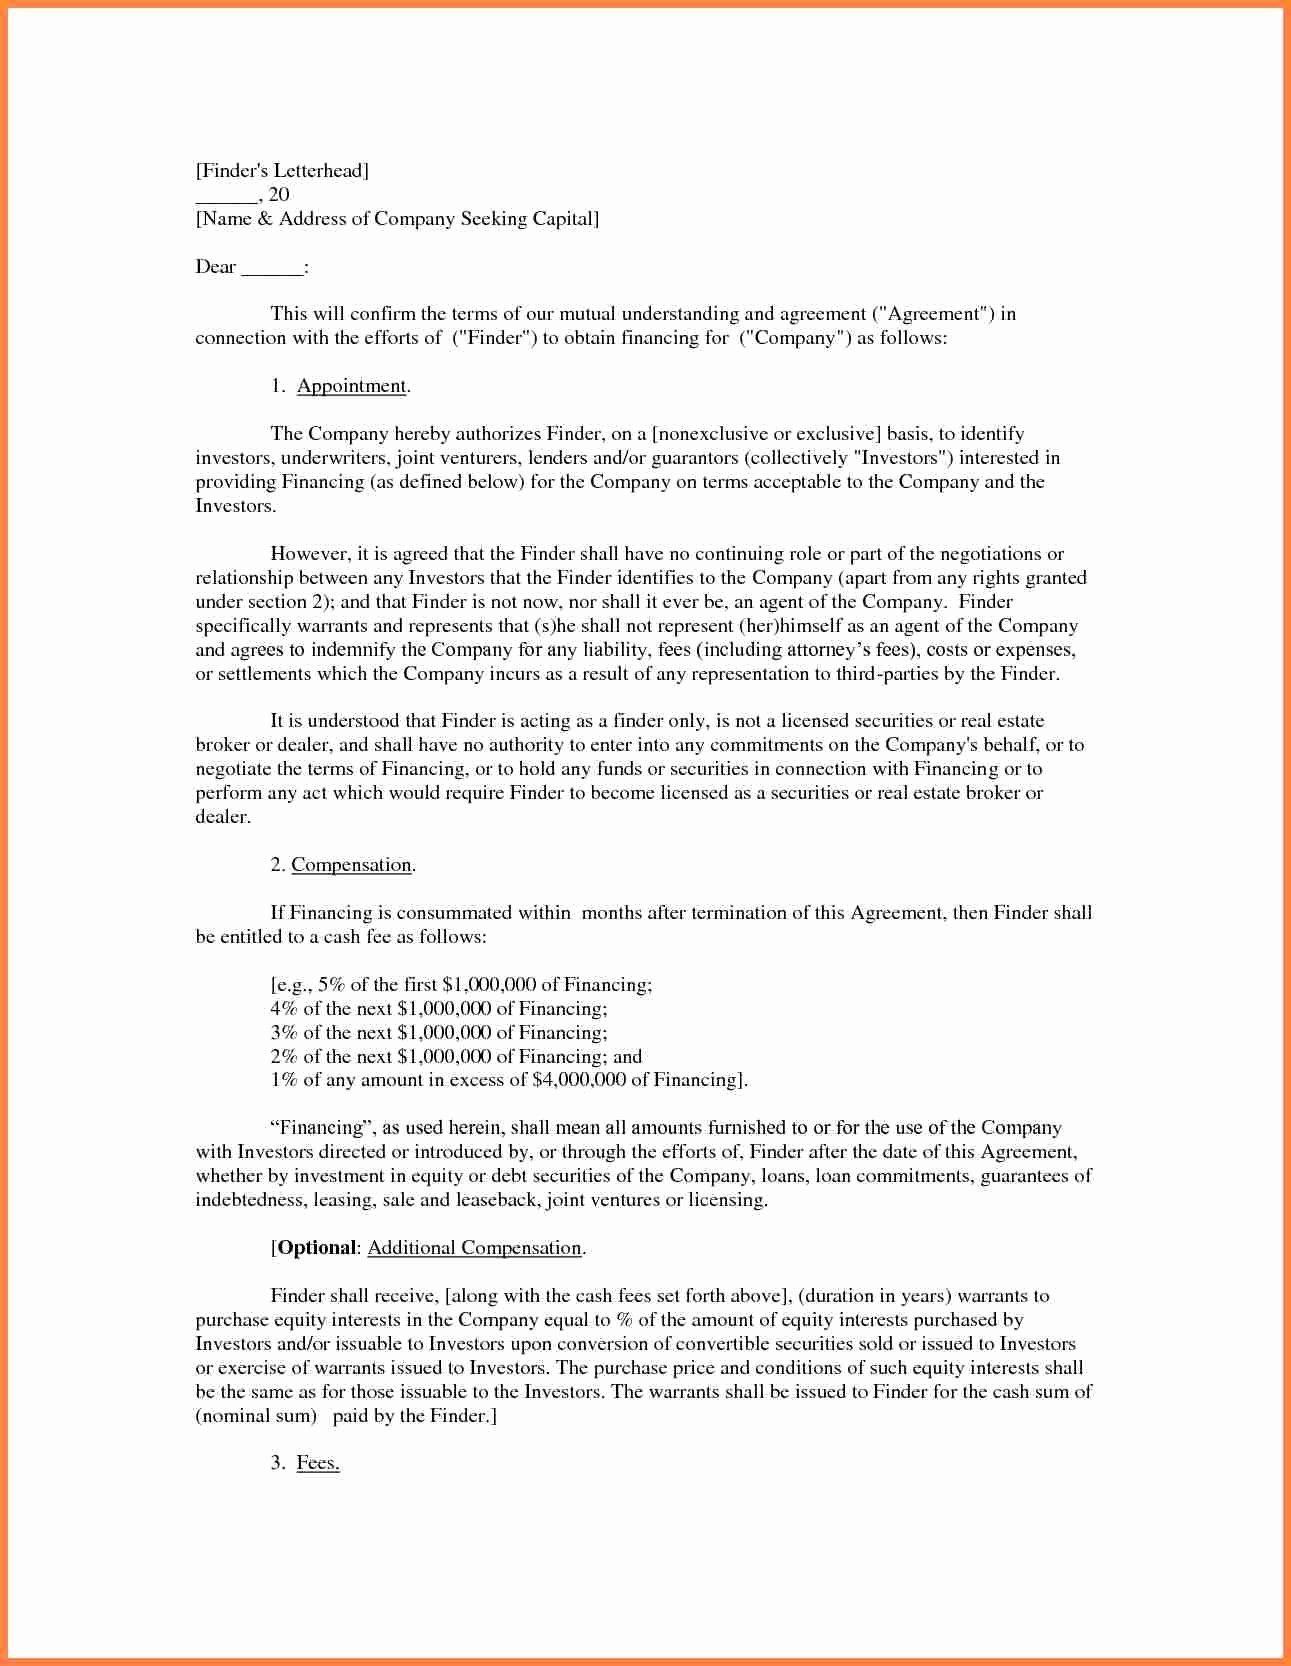 Contract Template Between Two Parties Unique 7 Agreement Letter Template Between Two Parties